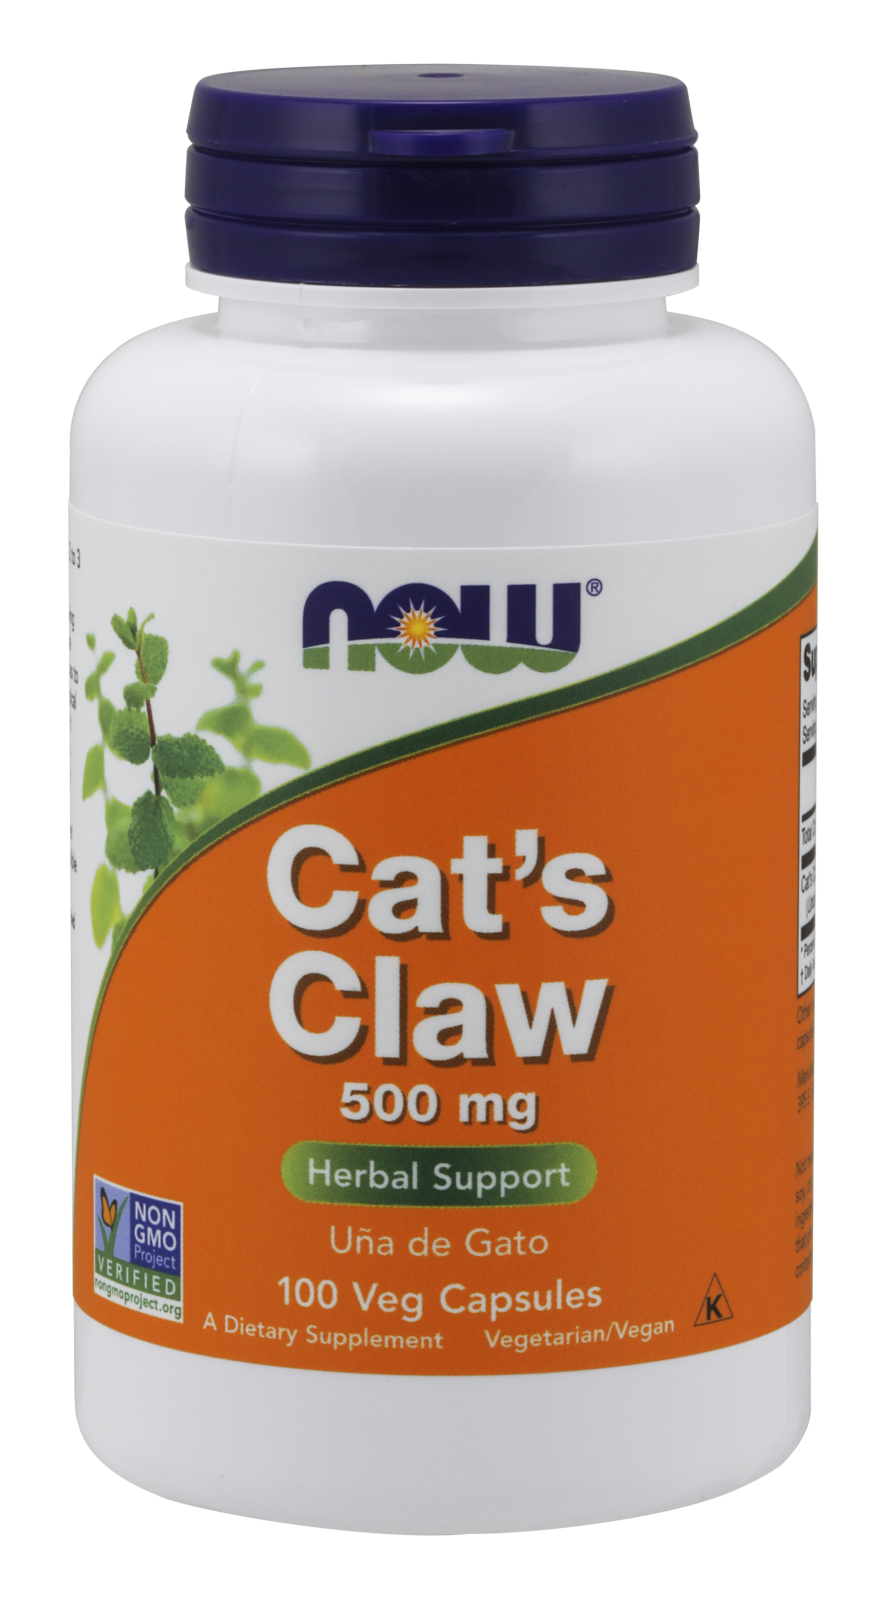 Cat's Claw 500 mg 100 Veg Capsules expiration date 2/2024